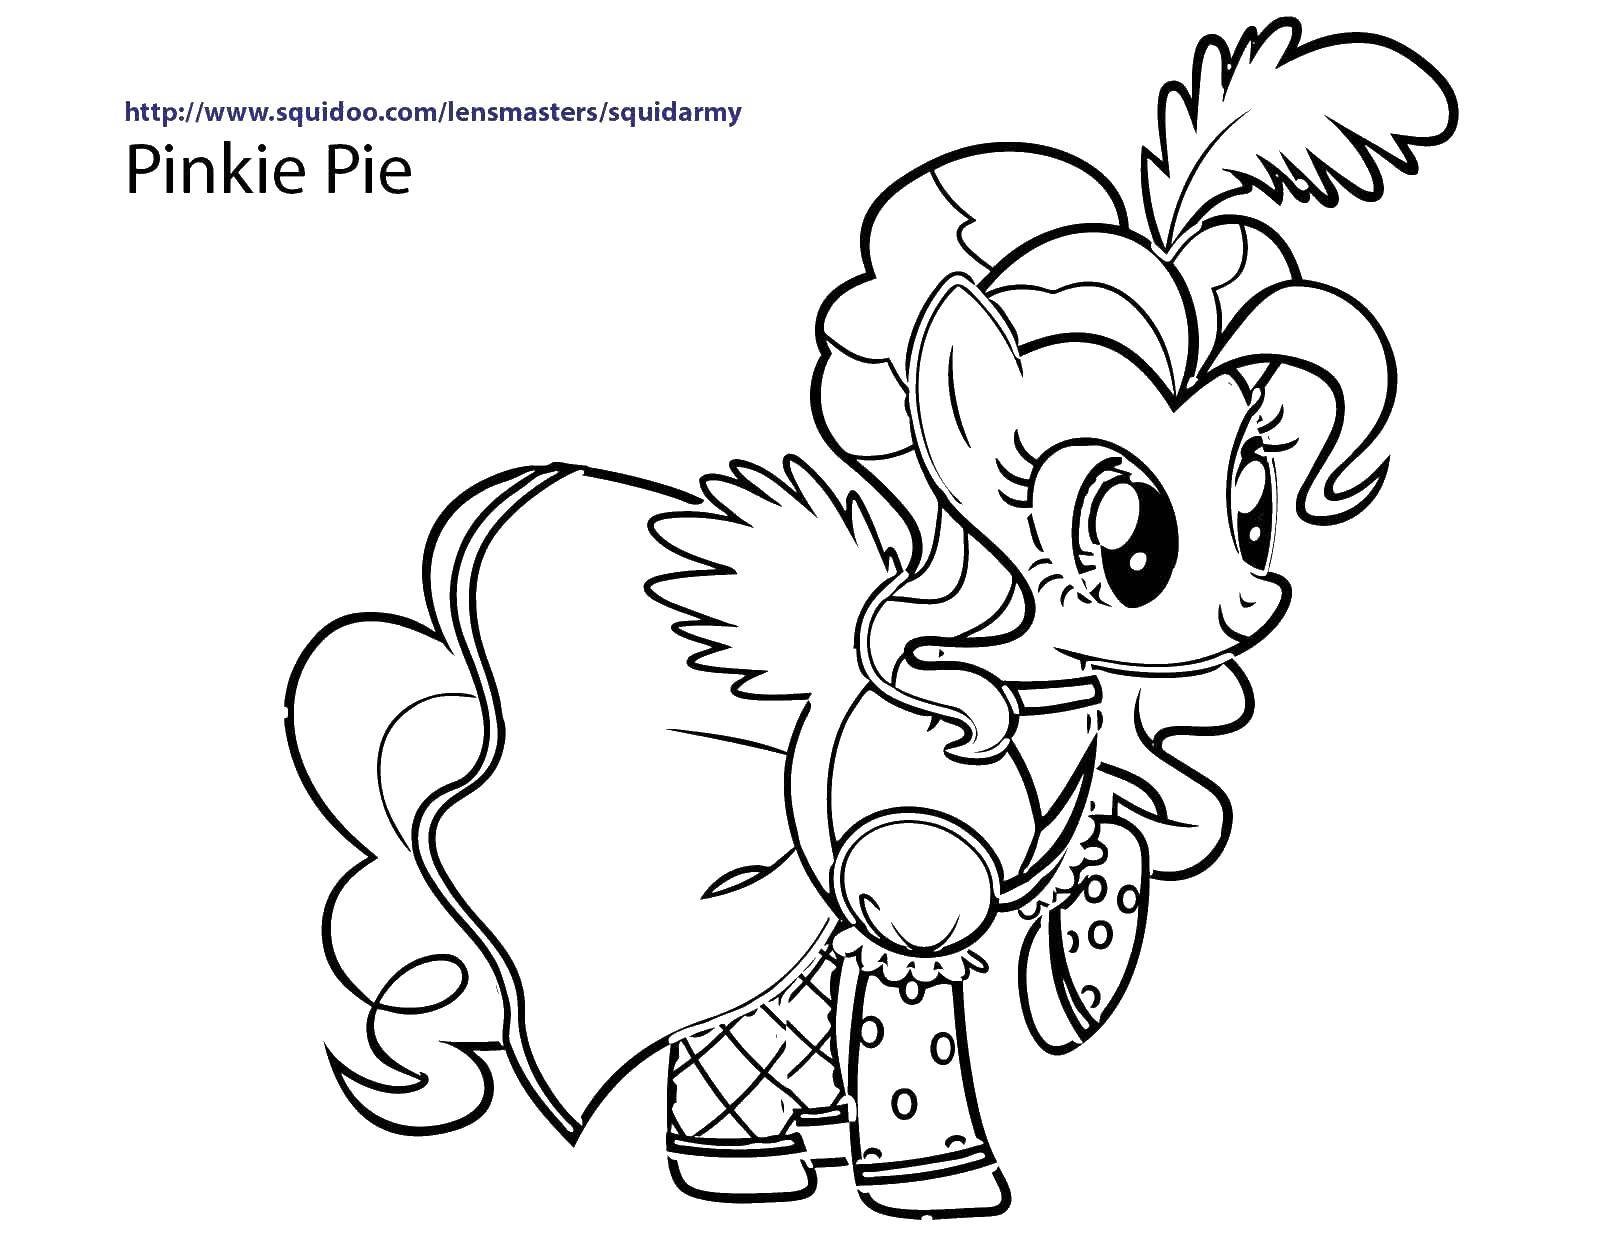 Coloring Pinkie. Category my little pony. Tags:  Pony, My little pony .